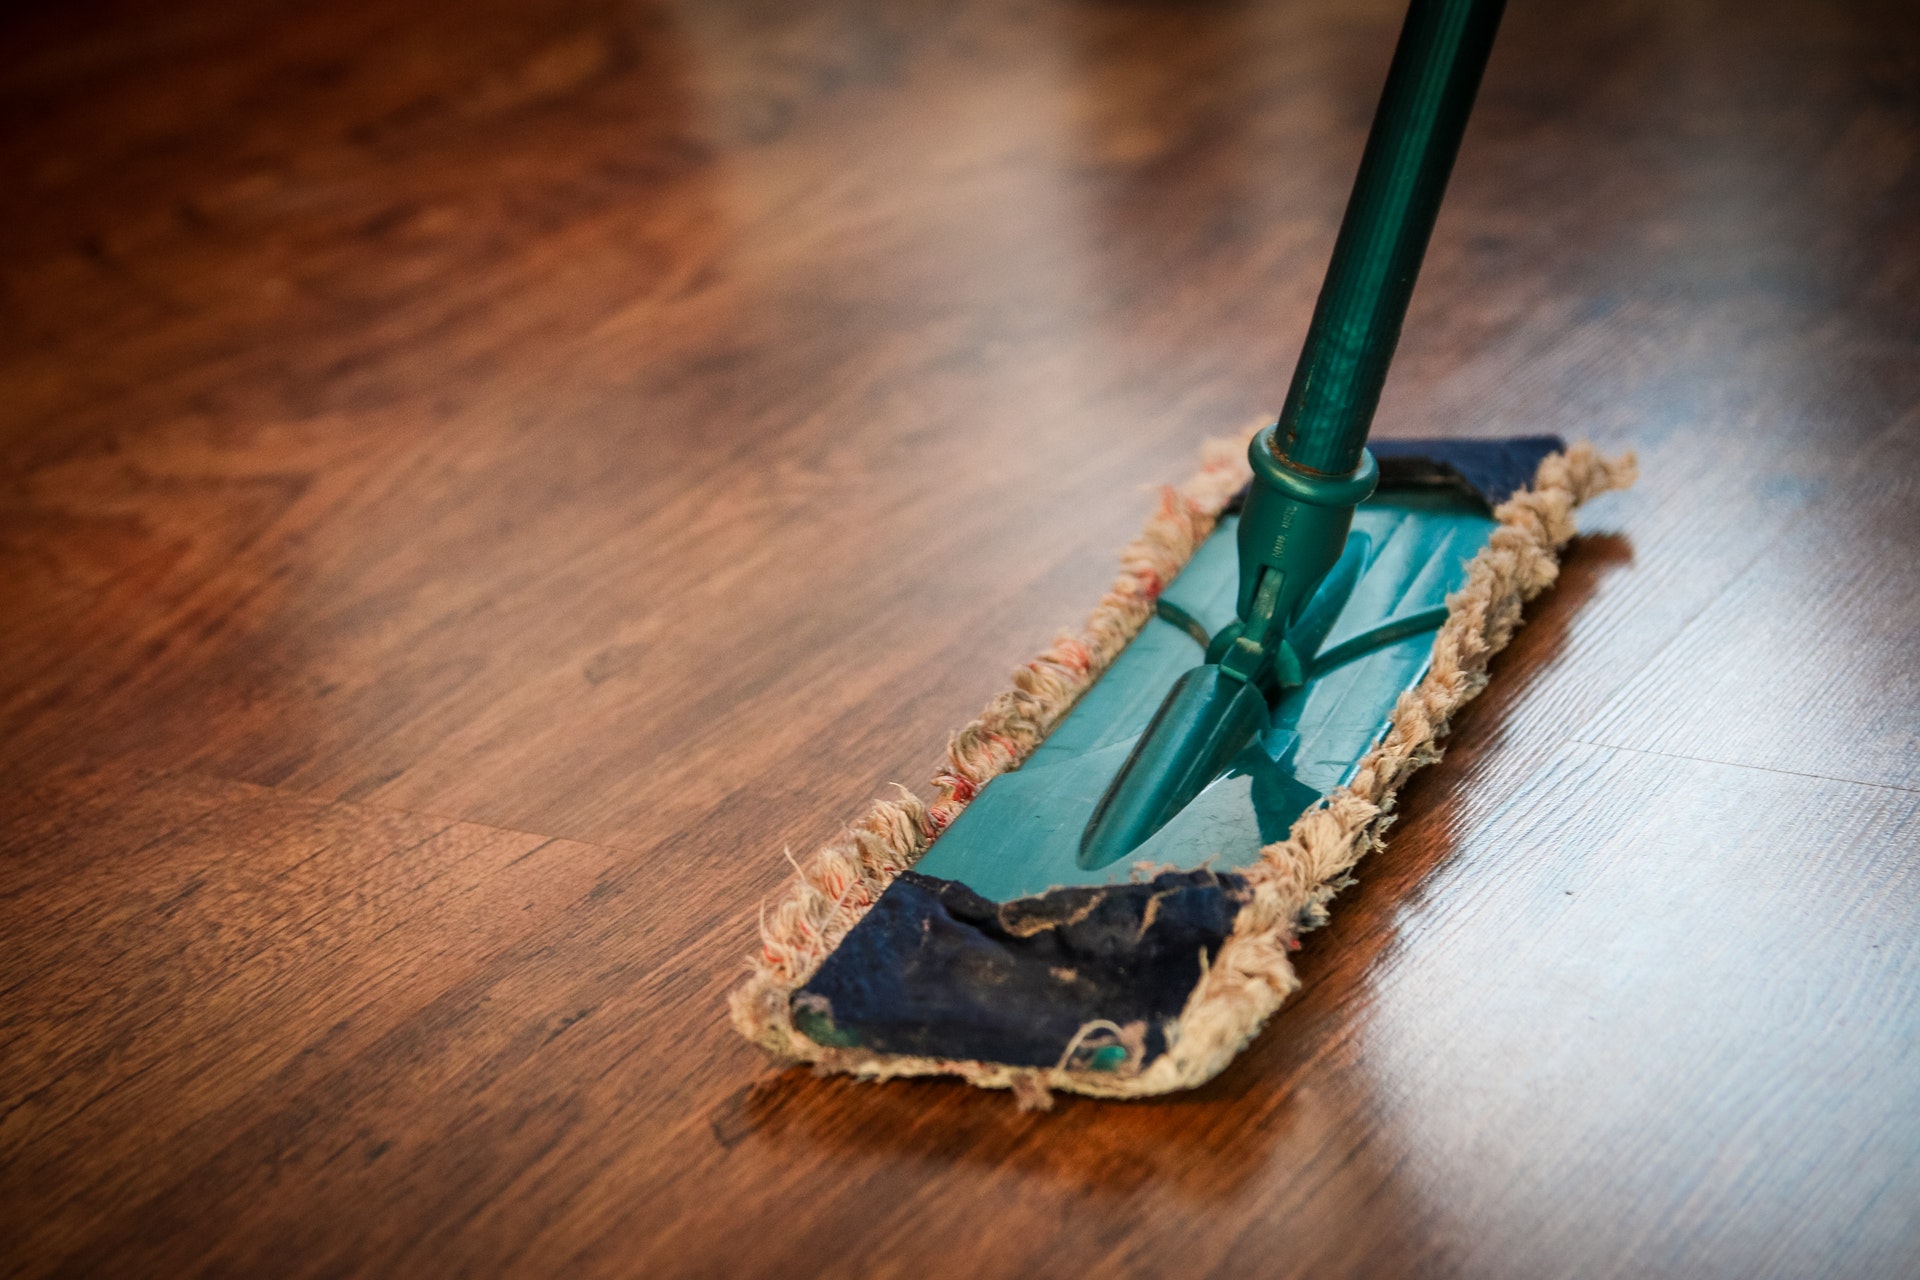 Tackle Cleaning Vinyl Plank Flooring, What Is The Best Way To Clean Hardwood Floors Daily